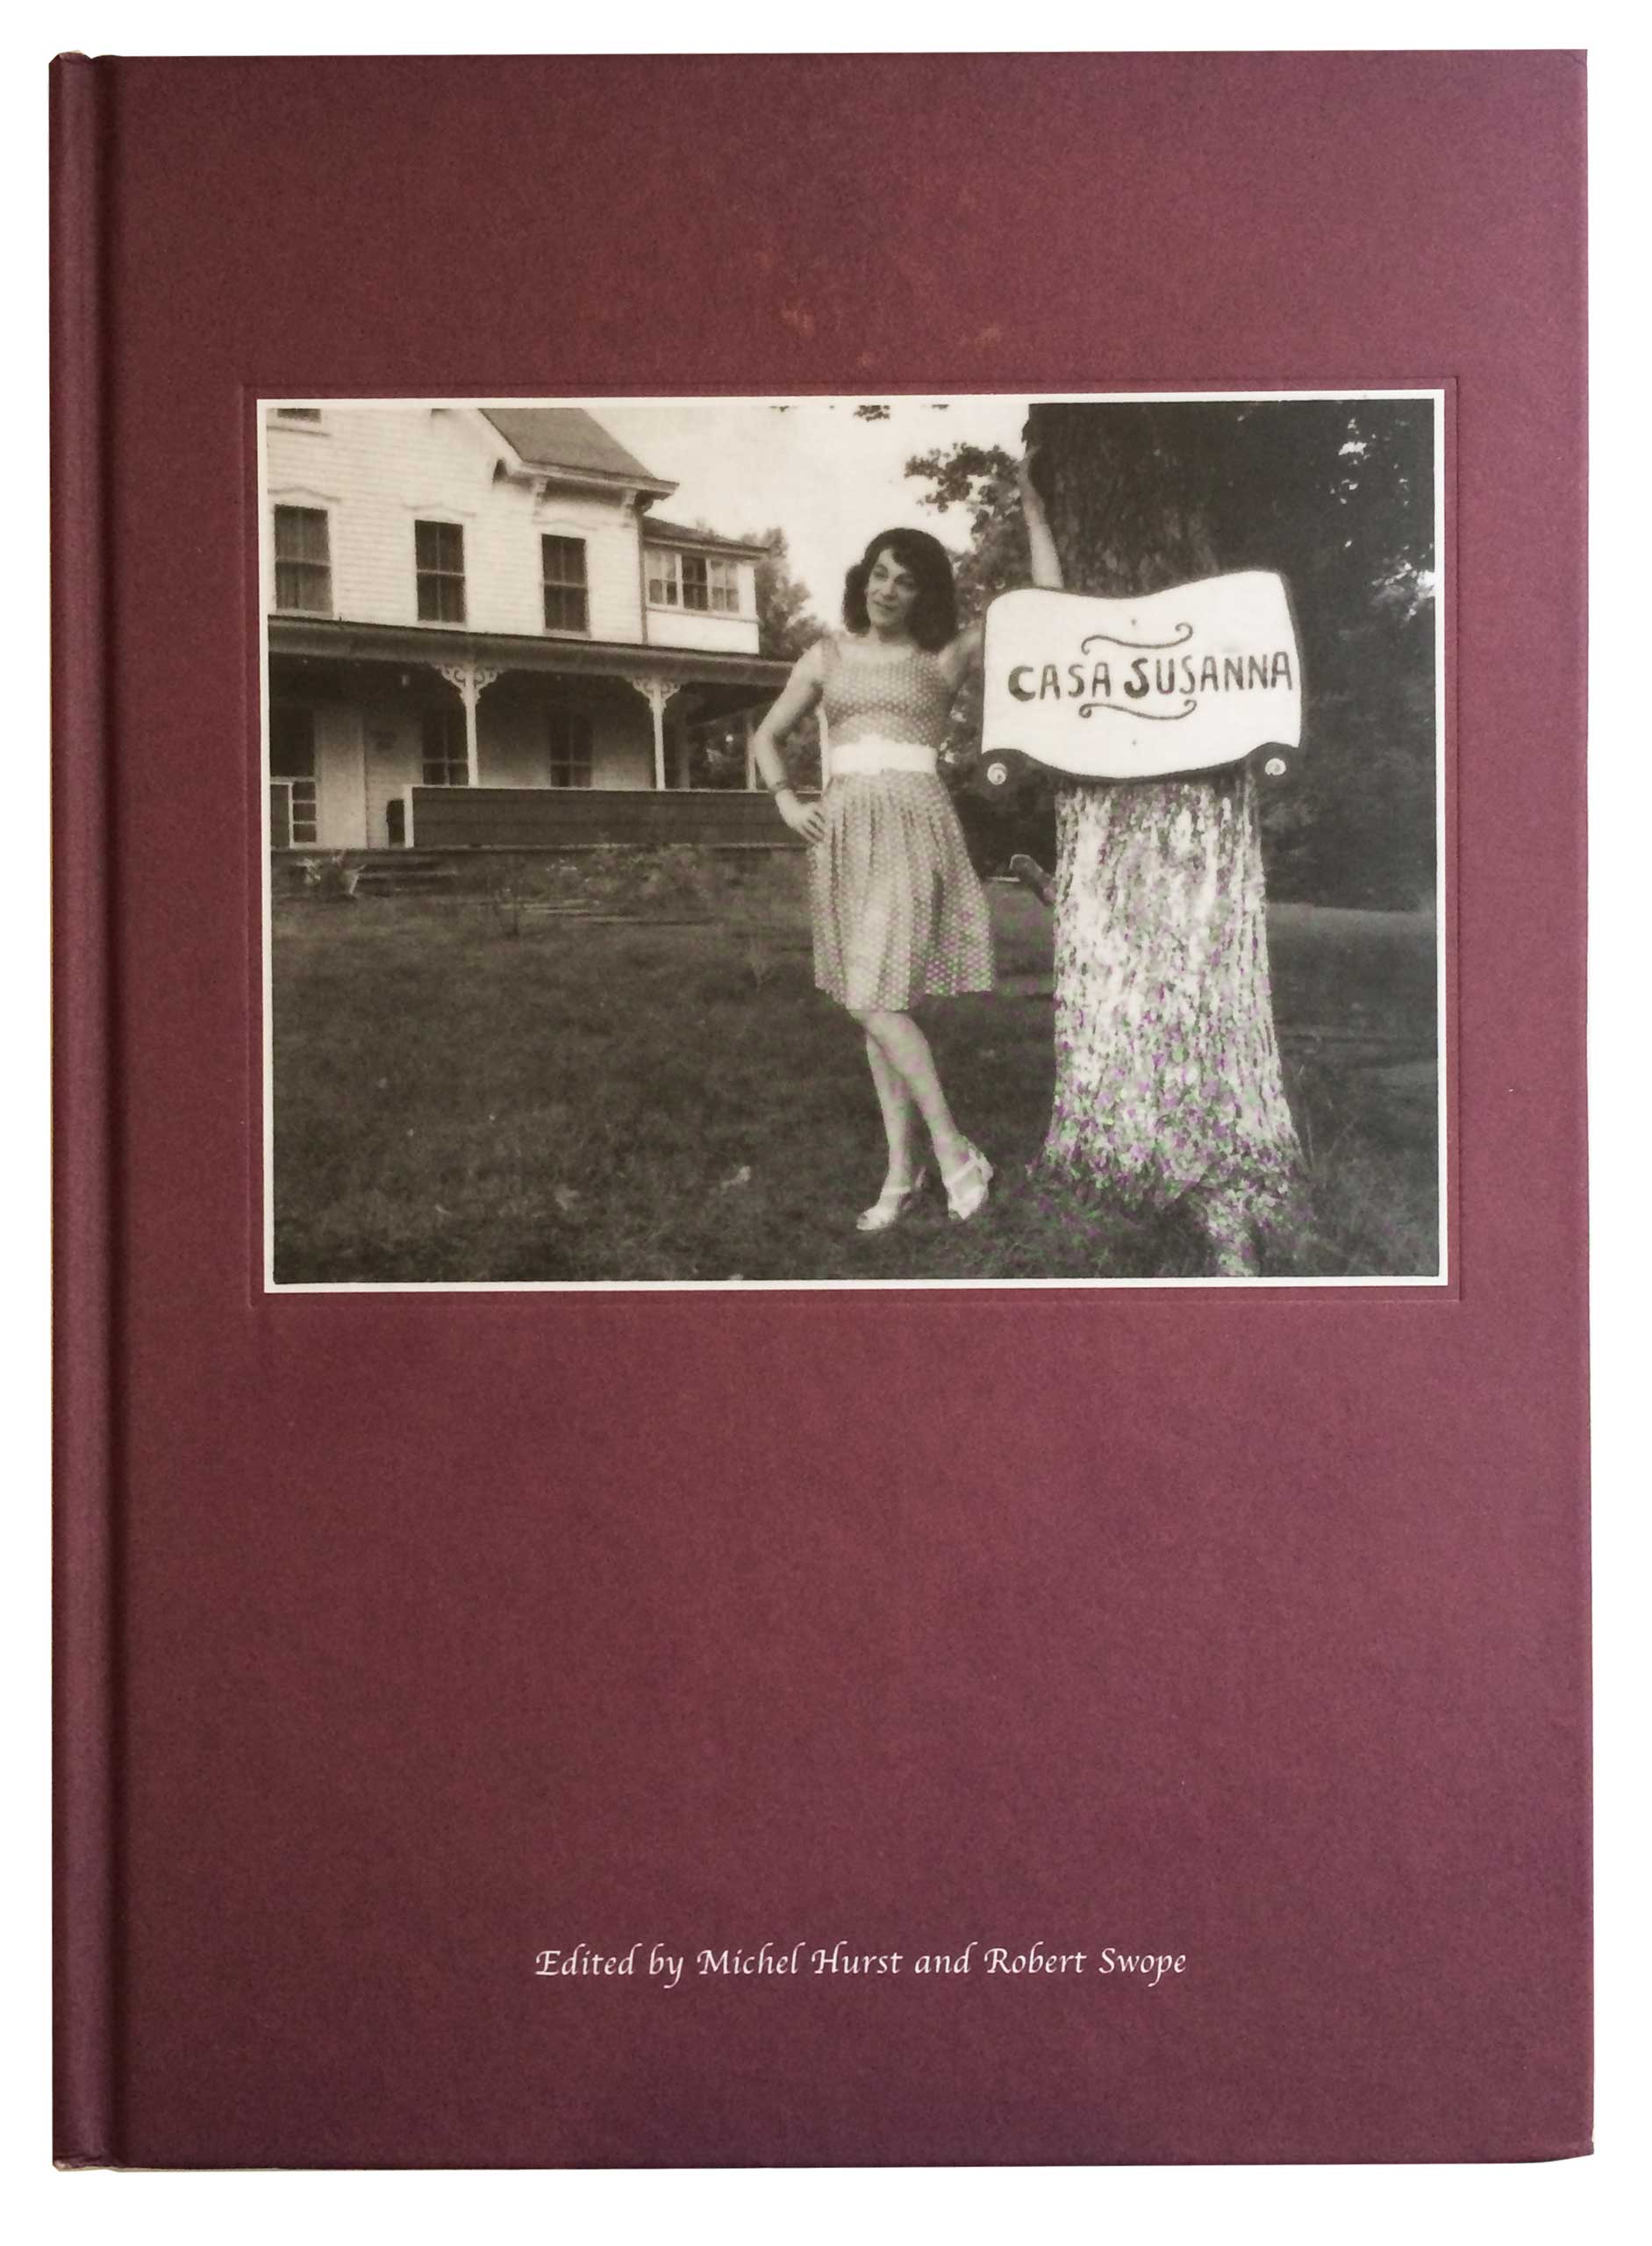 The cover of Casa Susanna, a collection of found photographs of a little known bungalo and legendary safe-haven for cross dressers and drag queens in the 50s and 60s.